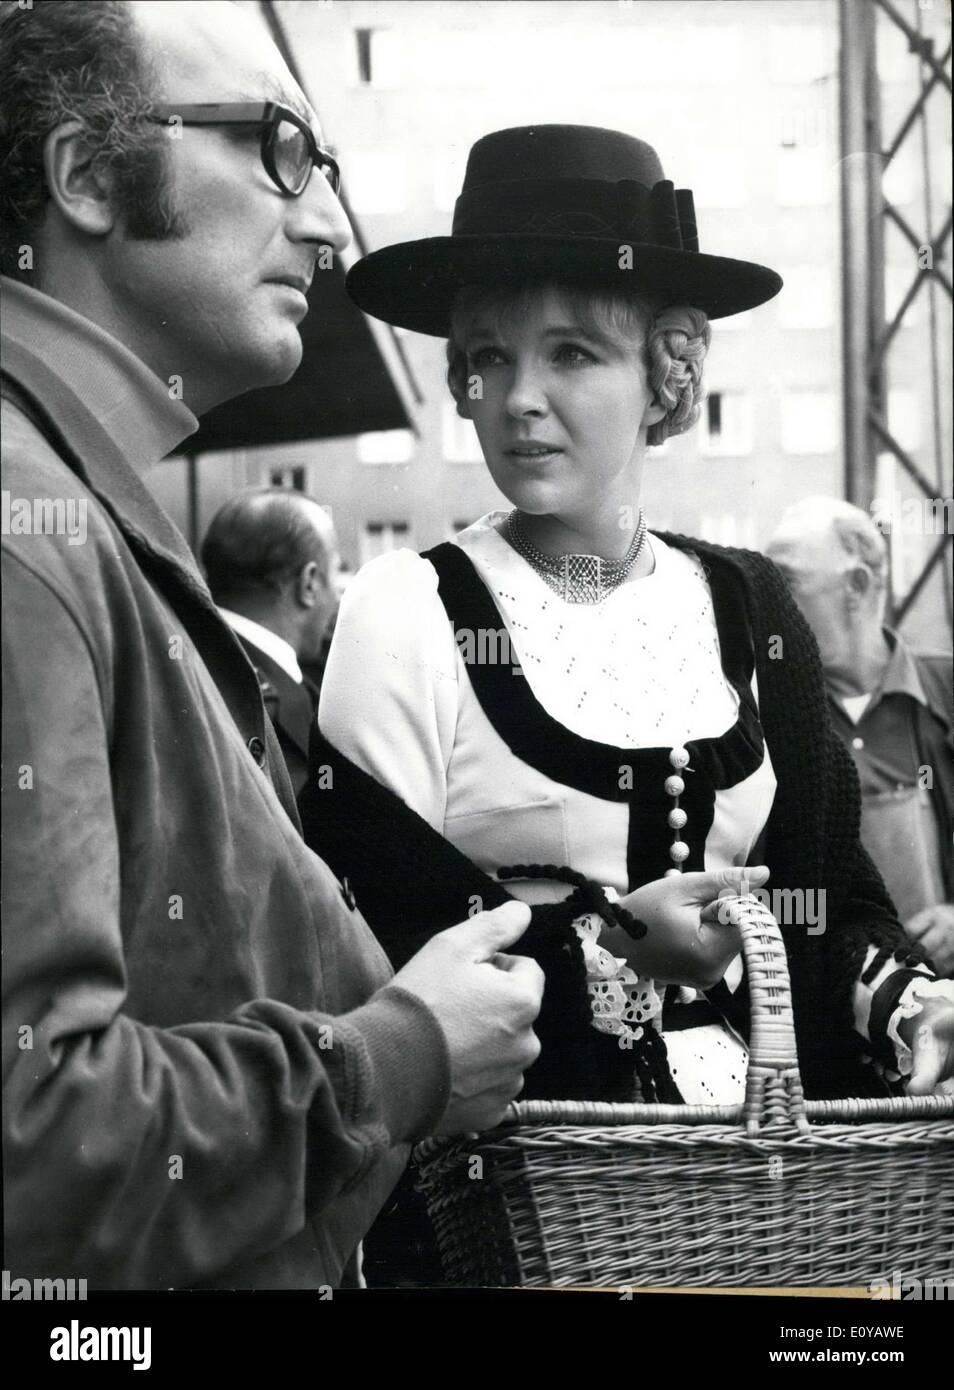 Sep. 20, 1969 - A different ''Cherub'': Gila von Weitershausen, who came to fame as a child actress, shows another side of herself here. In old Bavarian attire she looks like she has come from the countryside to get to know the big city of Munich. At the same time, an American, Lester Wilson came from across the pond in order to experience the Bavarian congeniality. As it happens, the two met every once in a while on their excursions. The ending and high point of their Munich adventure is Oktoberfest Stock Photo